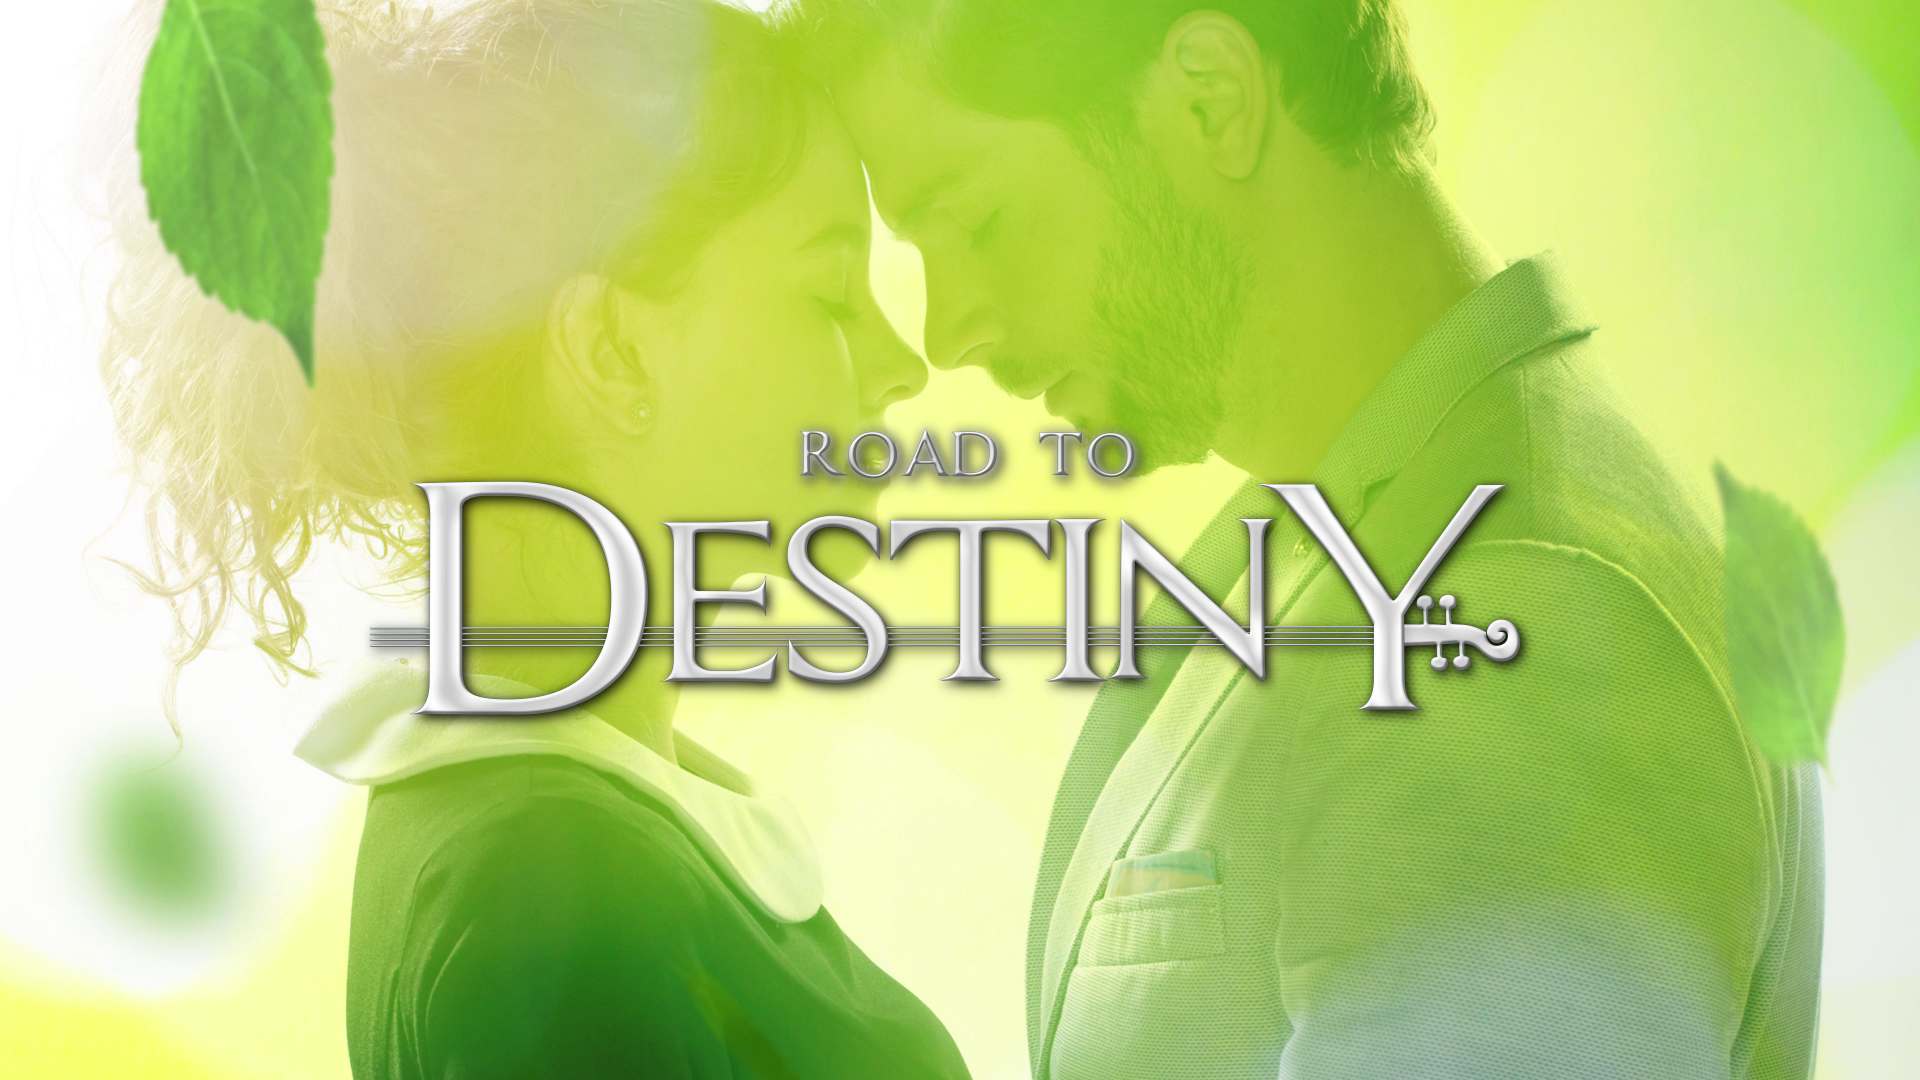 Road To Destiny makes its way back to TeleNovela Channel this September